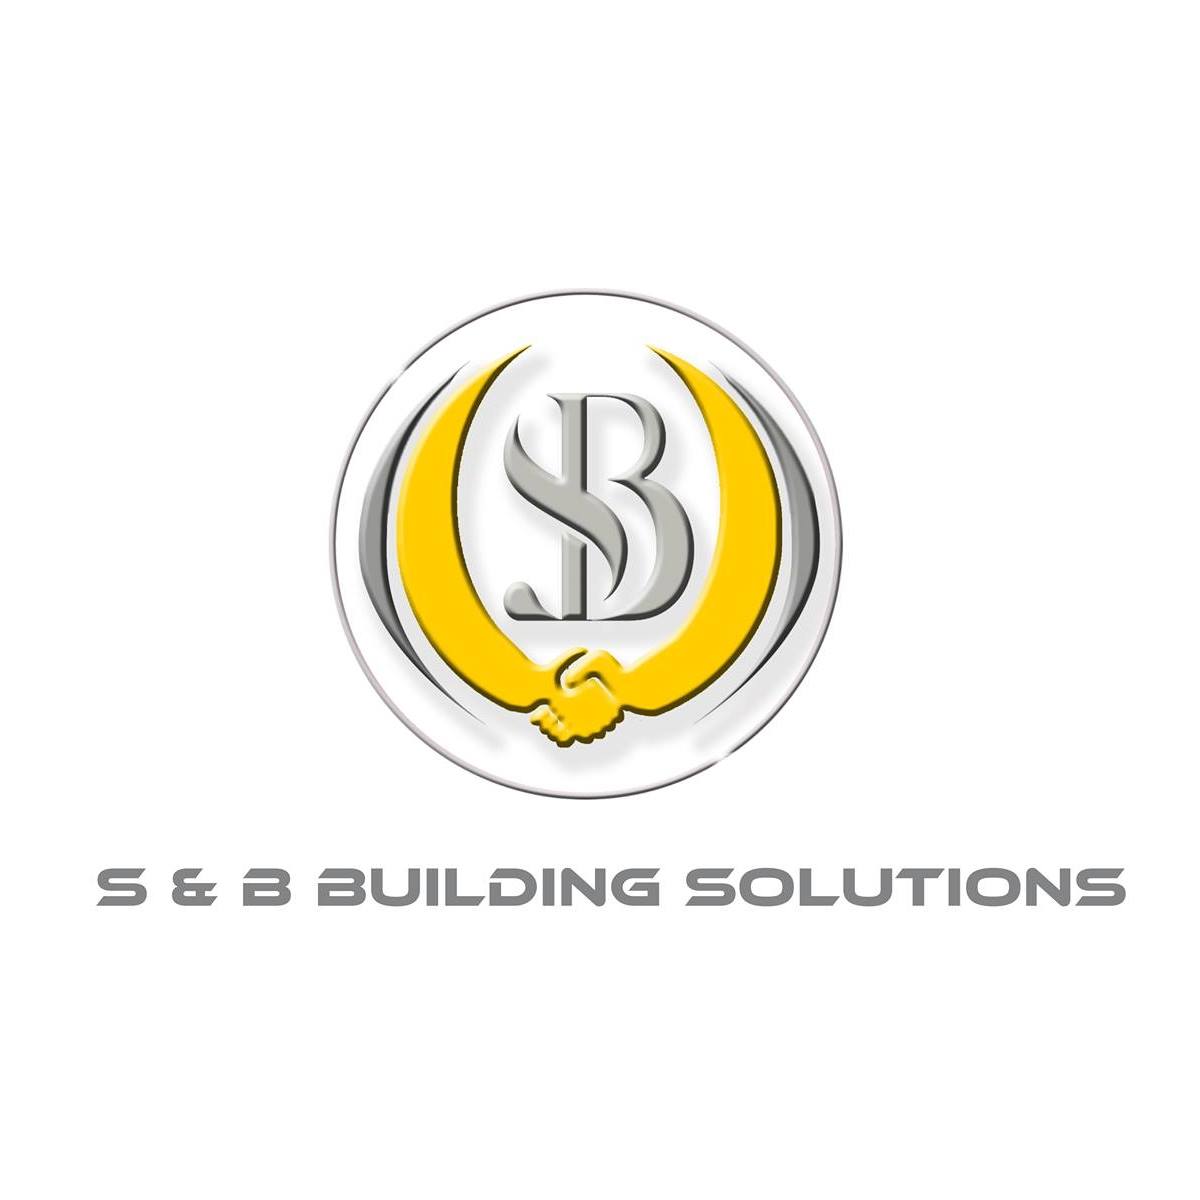 S&B Building Solutions|Architect|Professional Services